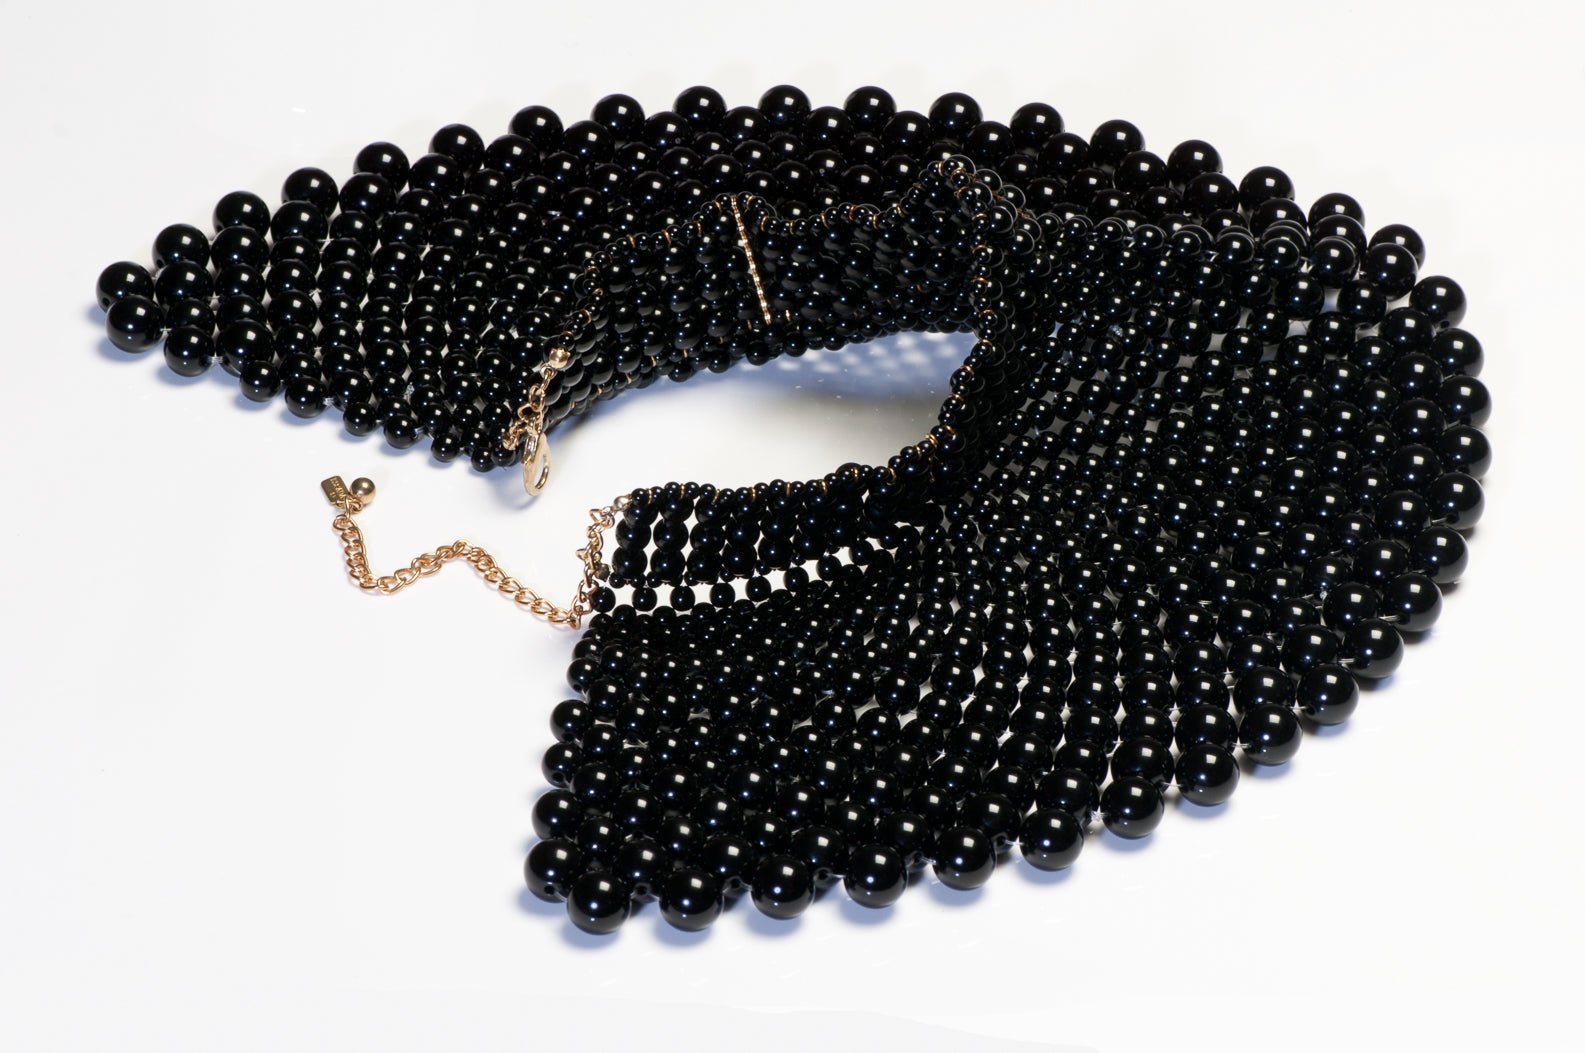 Vintage 1990’s Escada Couture Black Resin Beads Wide Choker Necklace